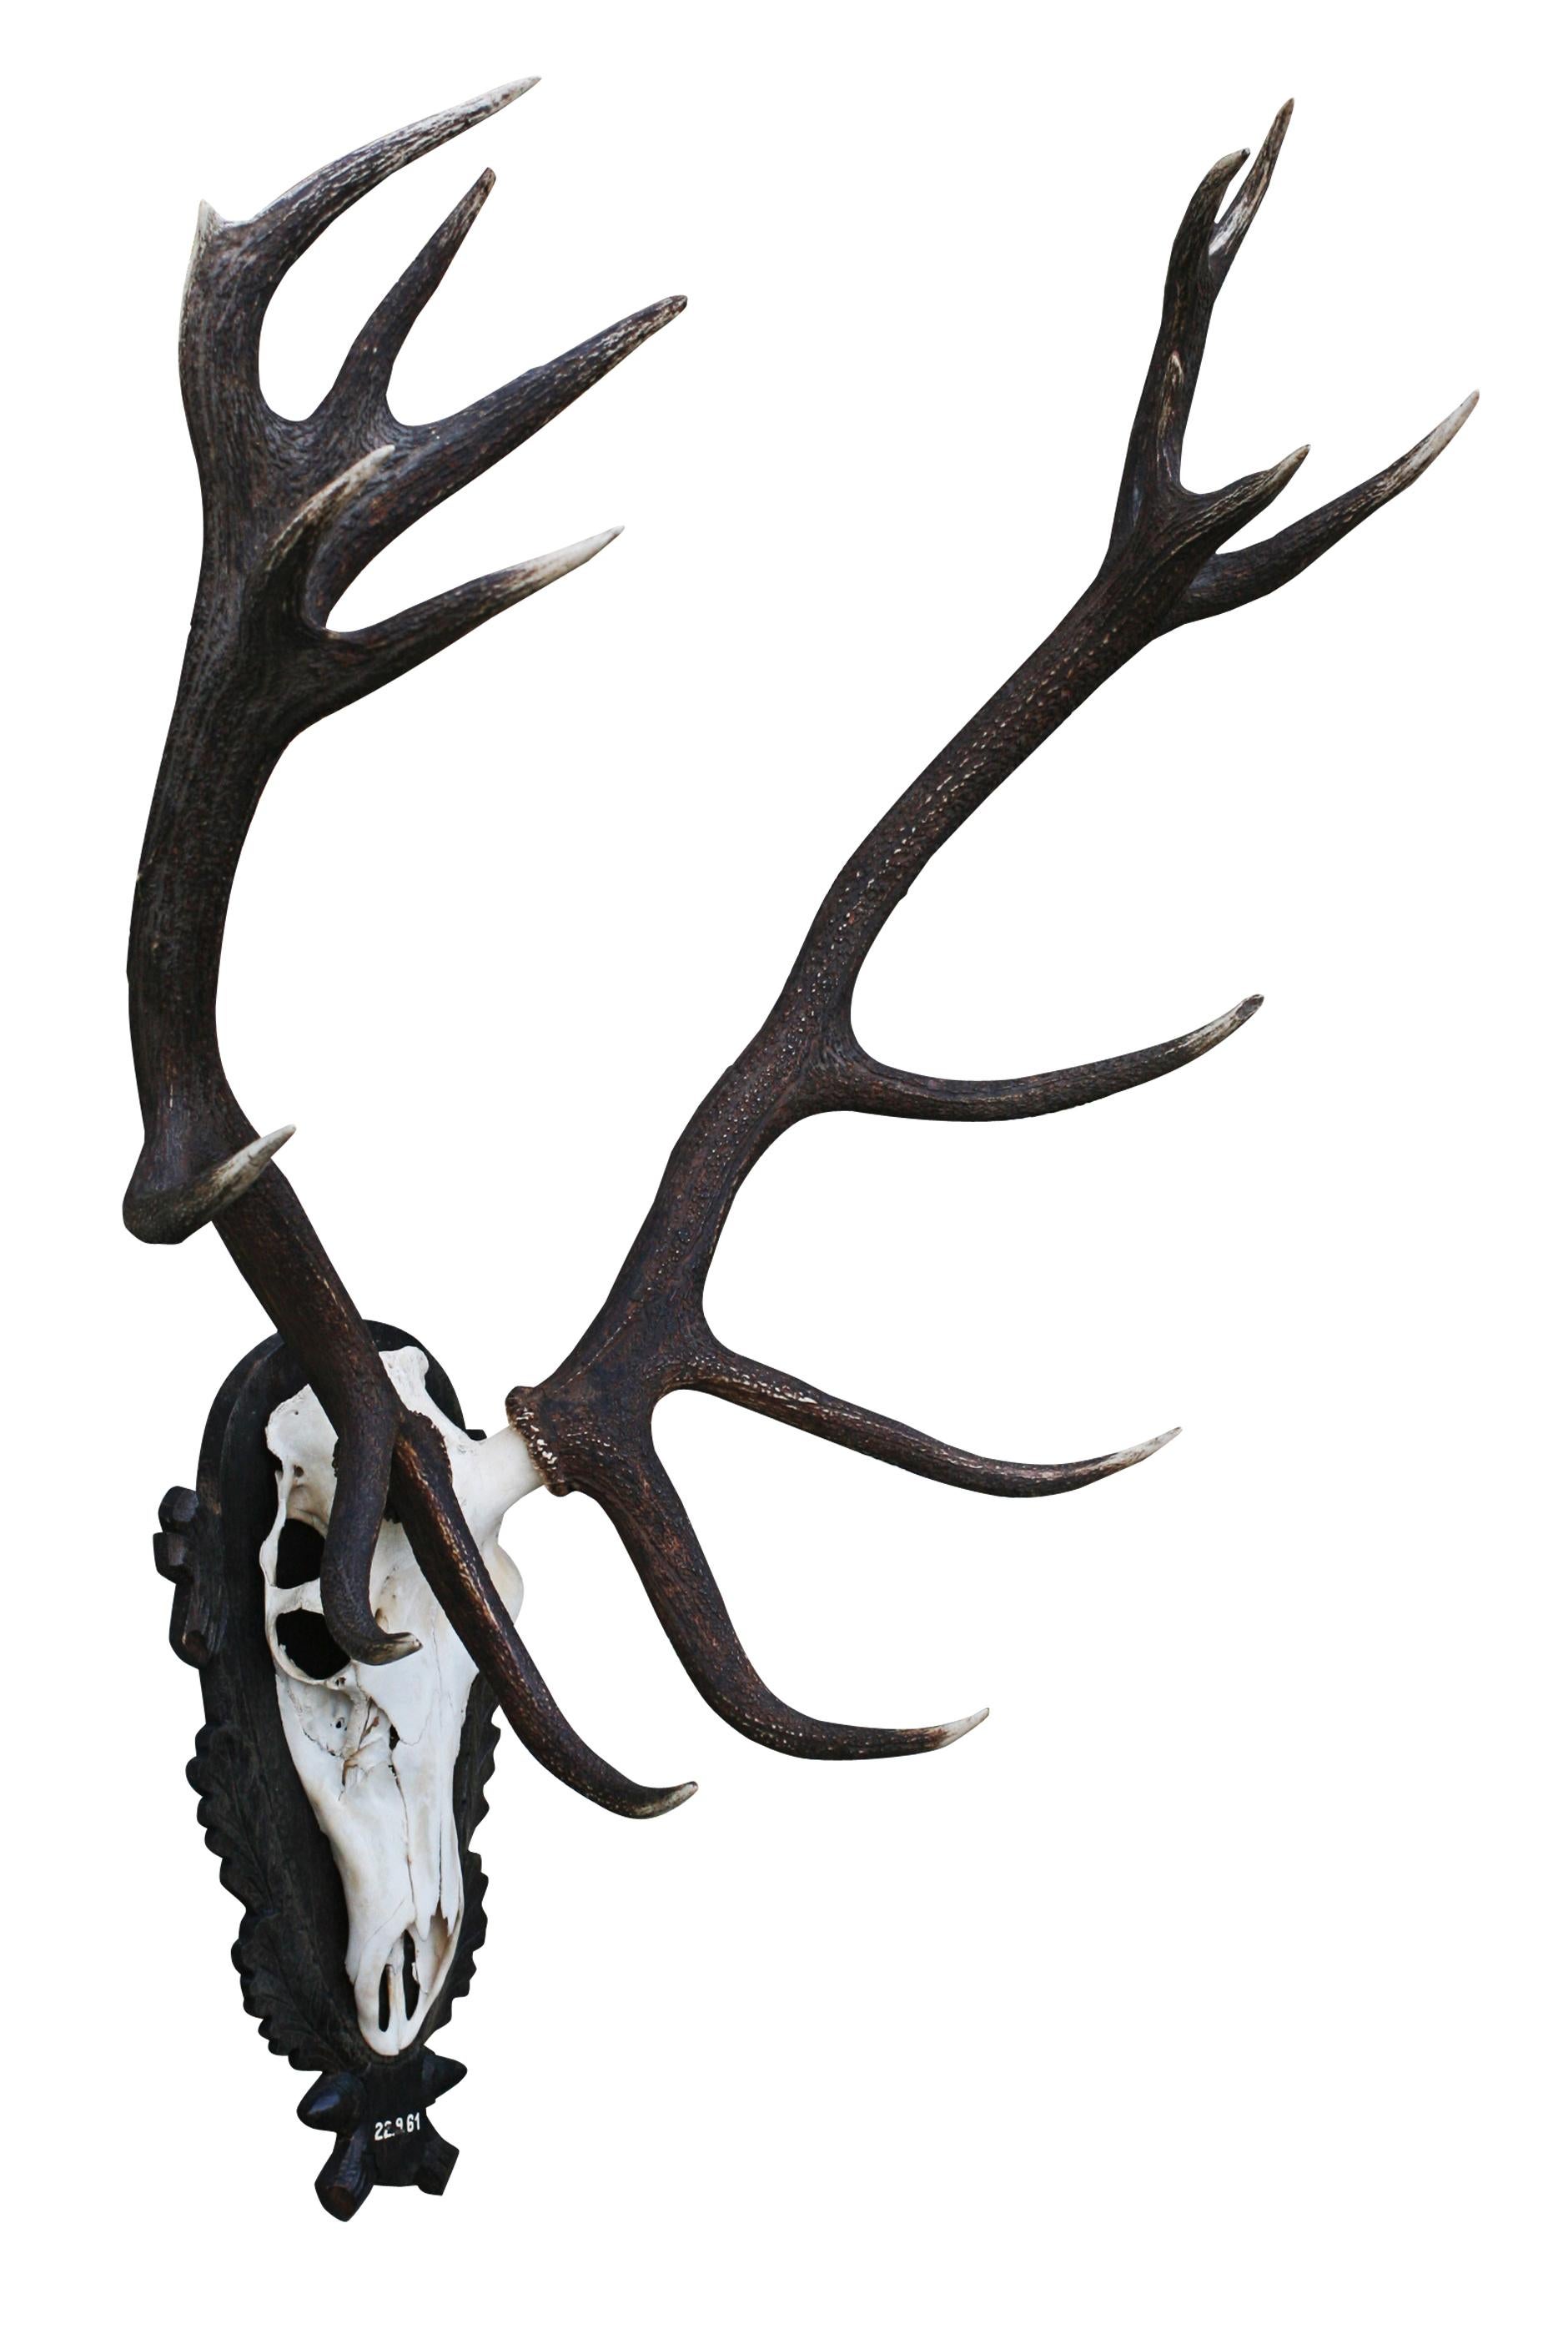 Set of European Red Deer Antlers.
A large pair of 15 point red deer antlers with skull cap, mounted onto an oak shield. The plaque is carved with oak leaves, acorns and a central shield painted with the date '22.9.61'. These stag antlers are an